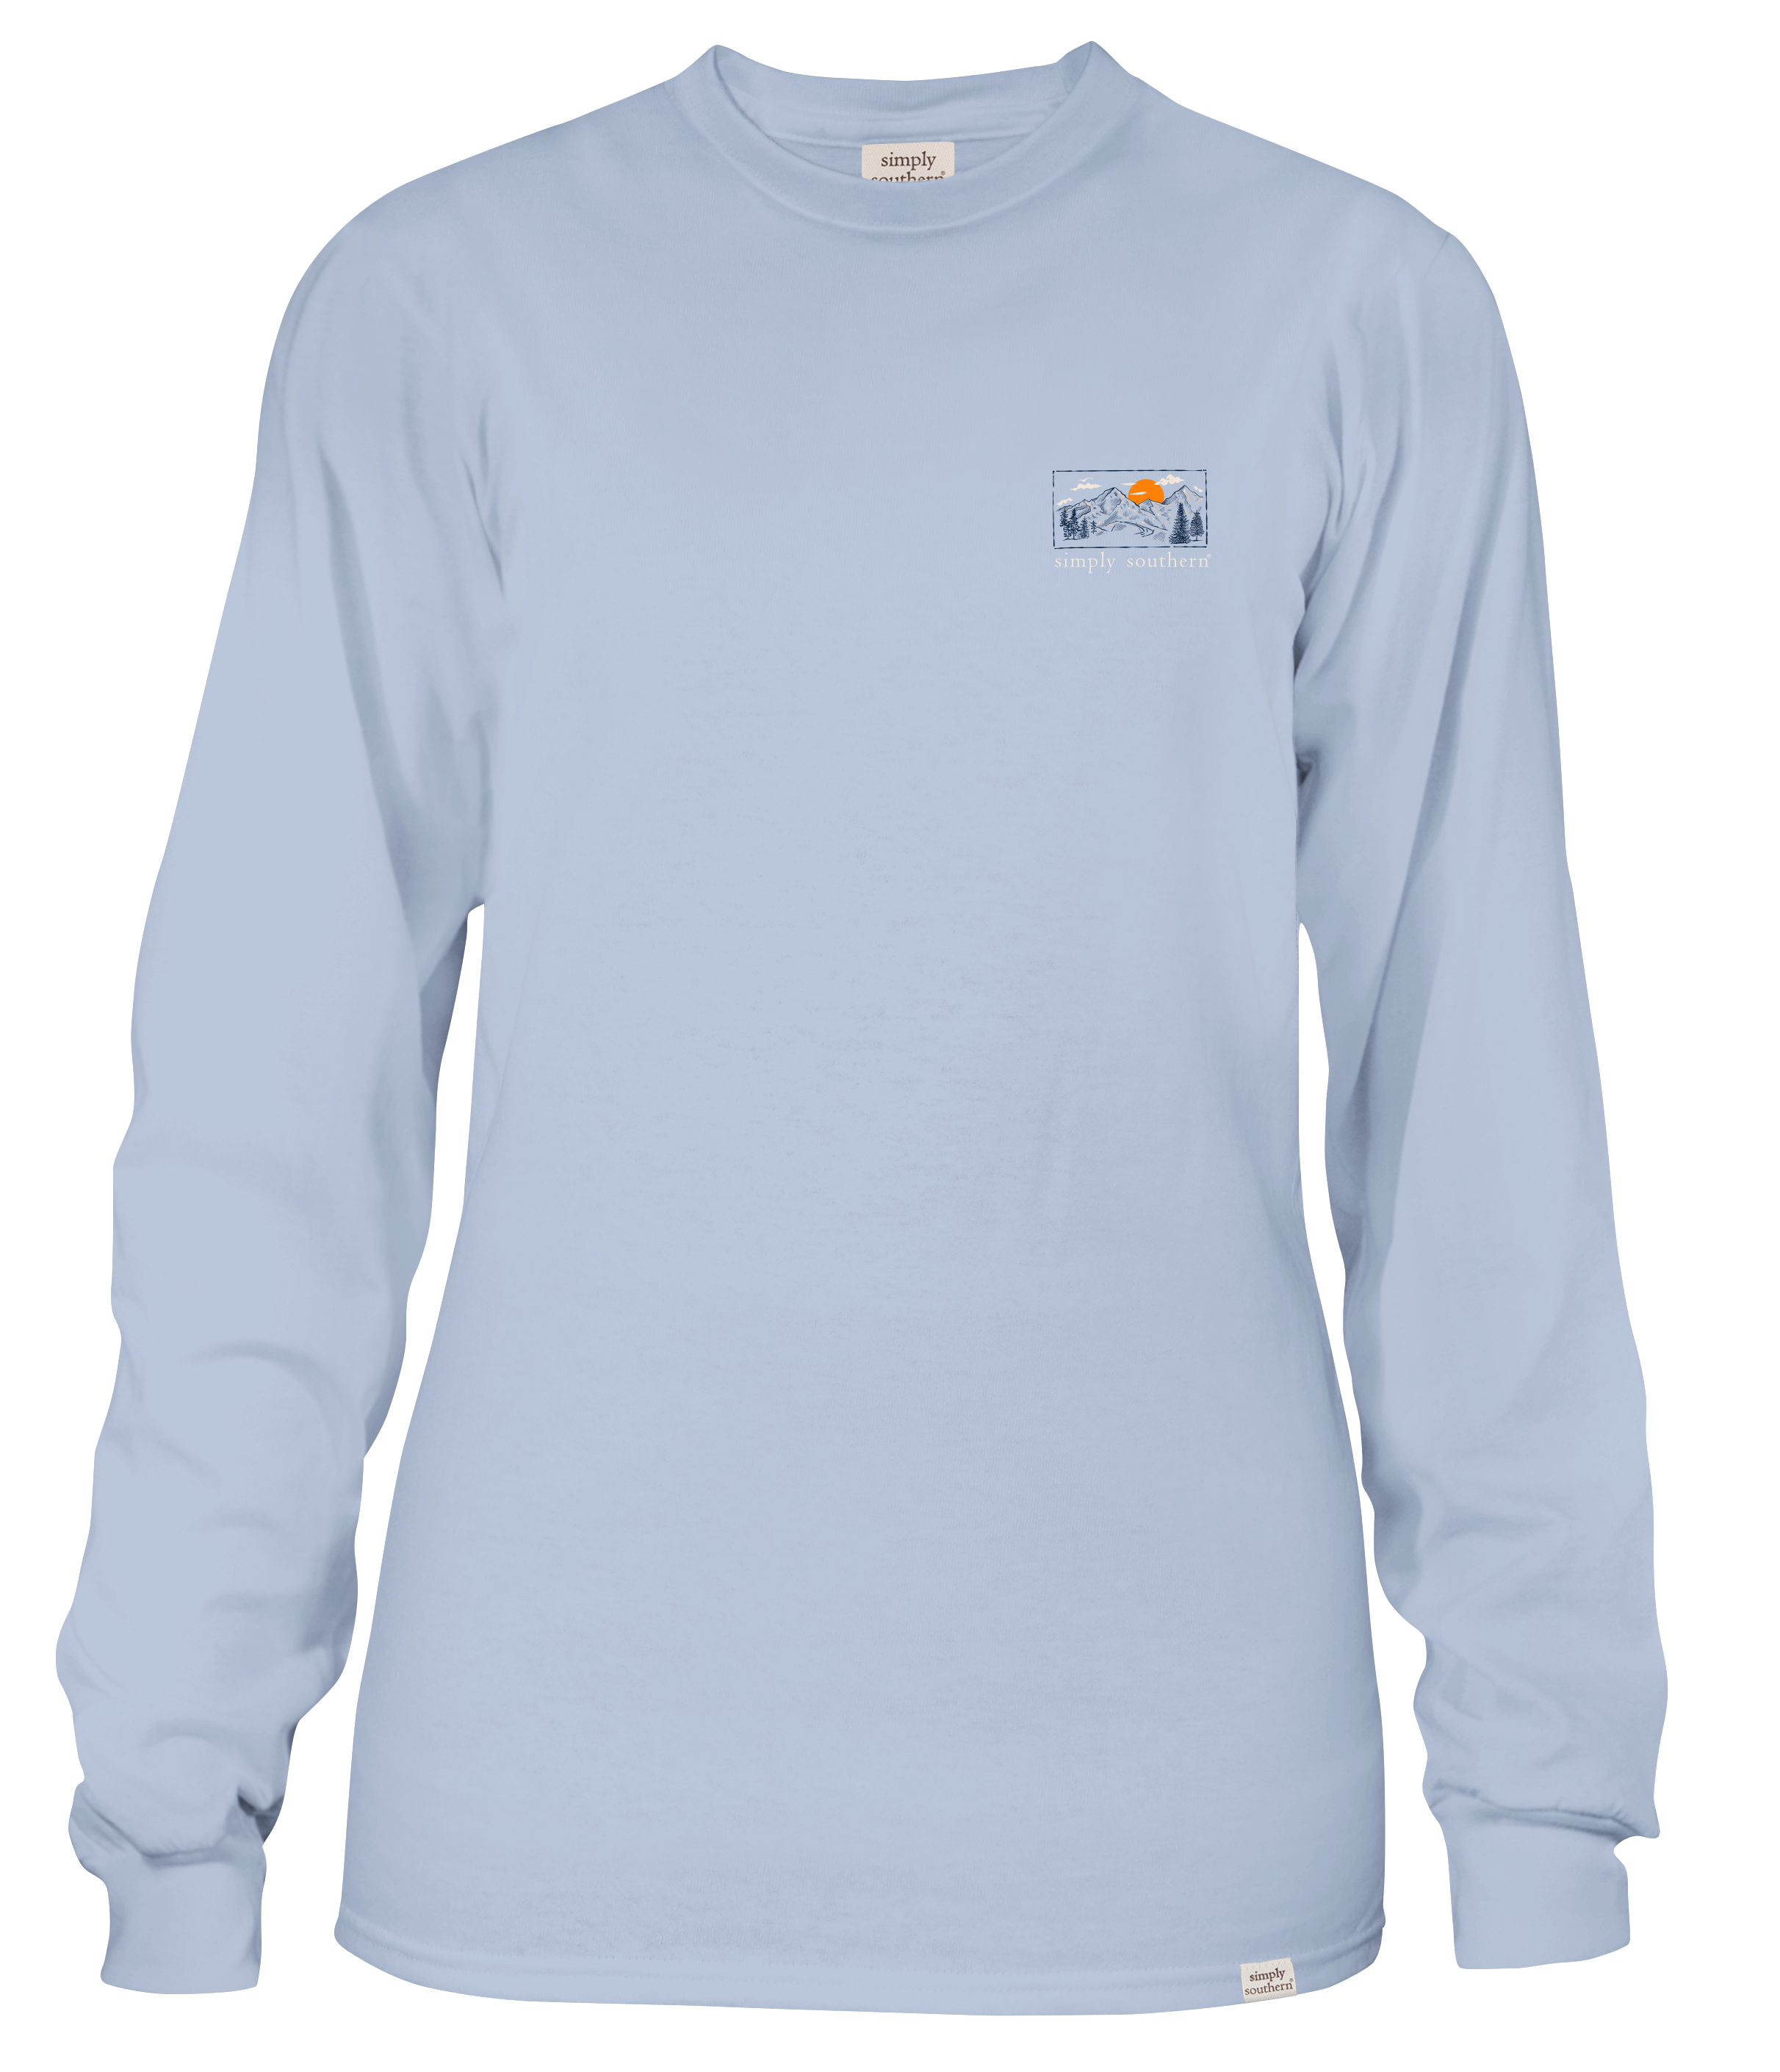 'Somebody Please Take Me To The Mountains' Long Sleeve Tee by Simply Southern